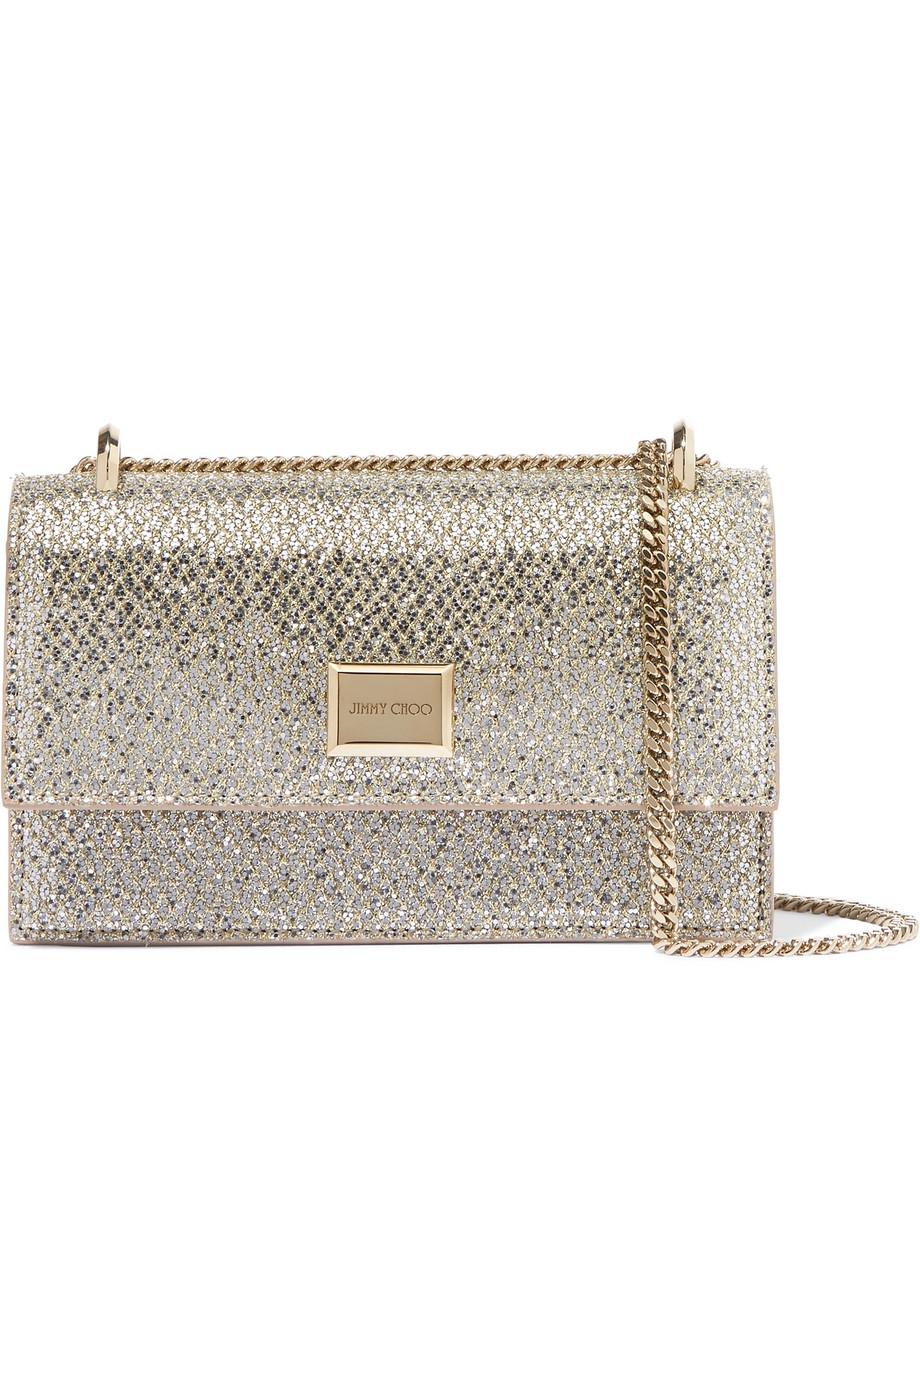 17 Gold Clutches to Wear With All Your Party Outfits | Who What Wear UK